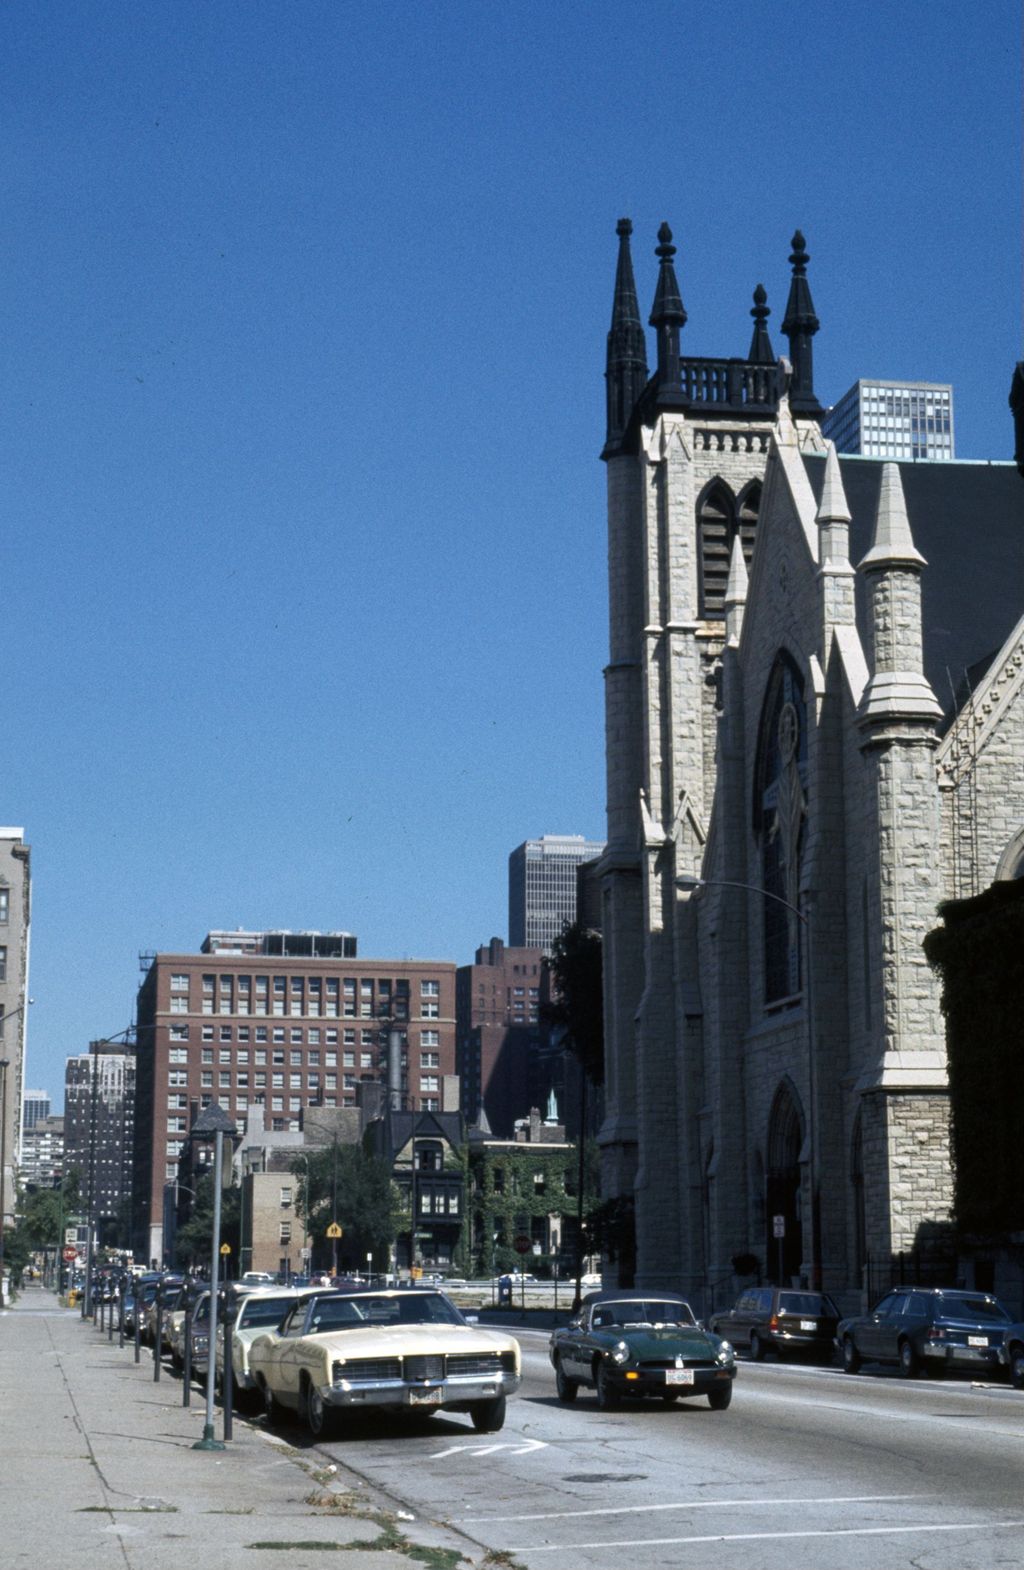 North Wabash Avenue and St. James Cathedral